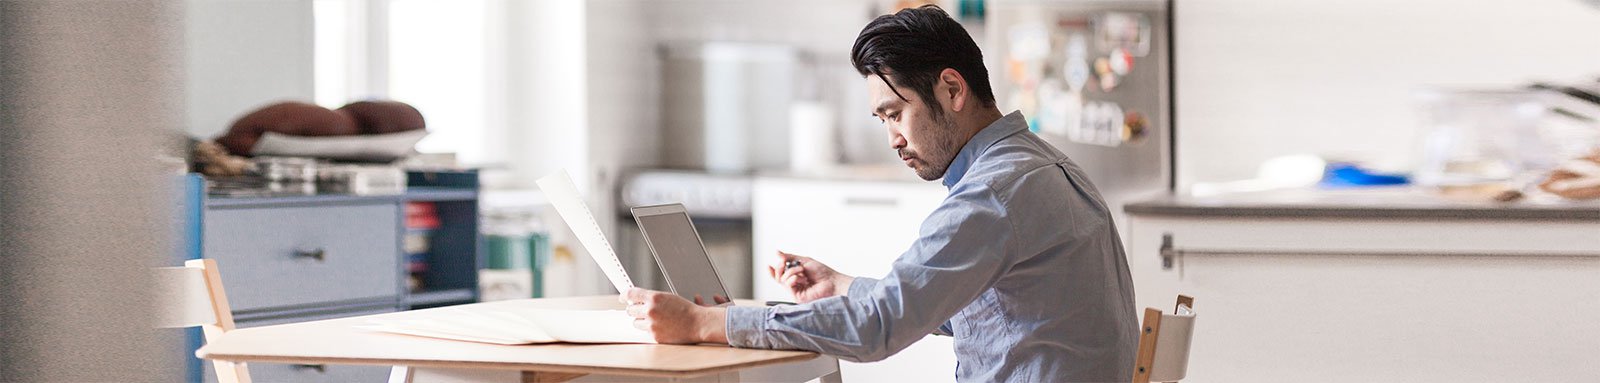 Man working at home looking at paper